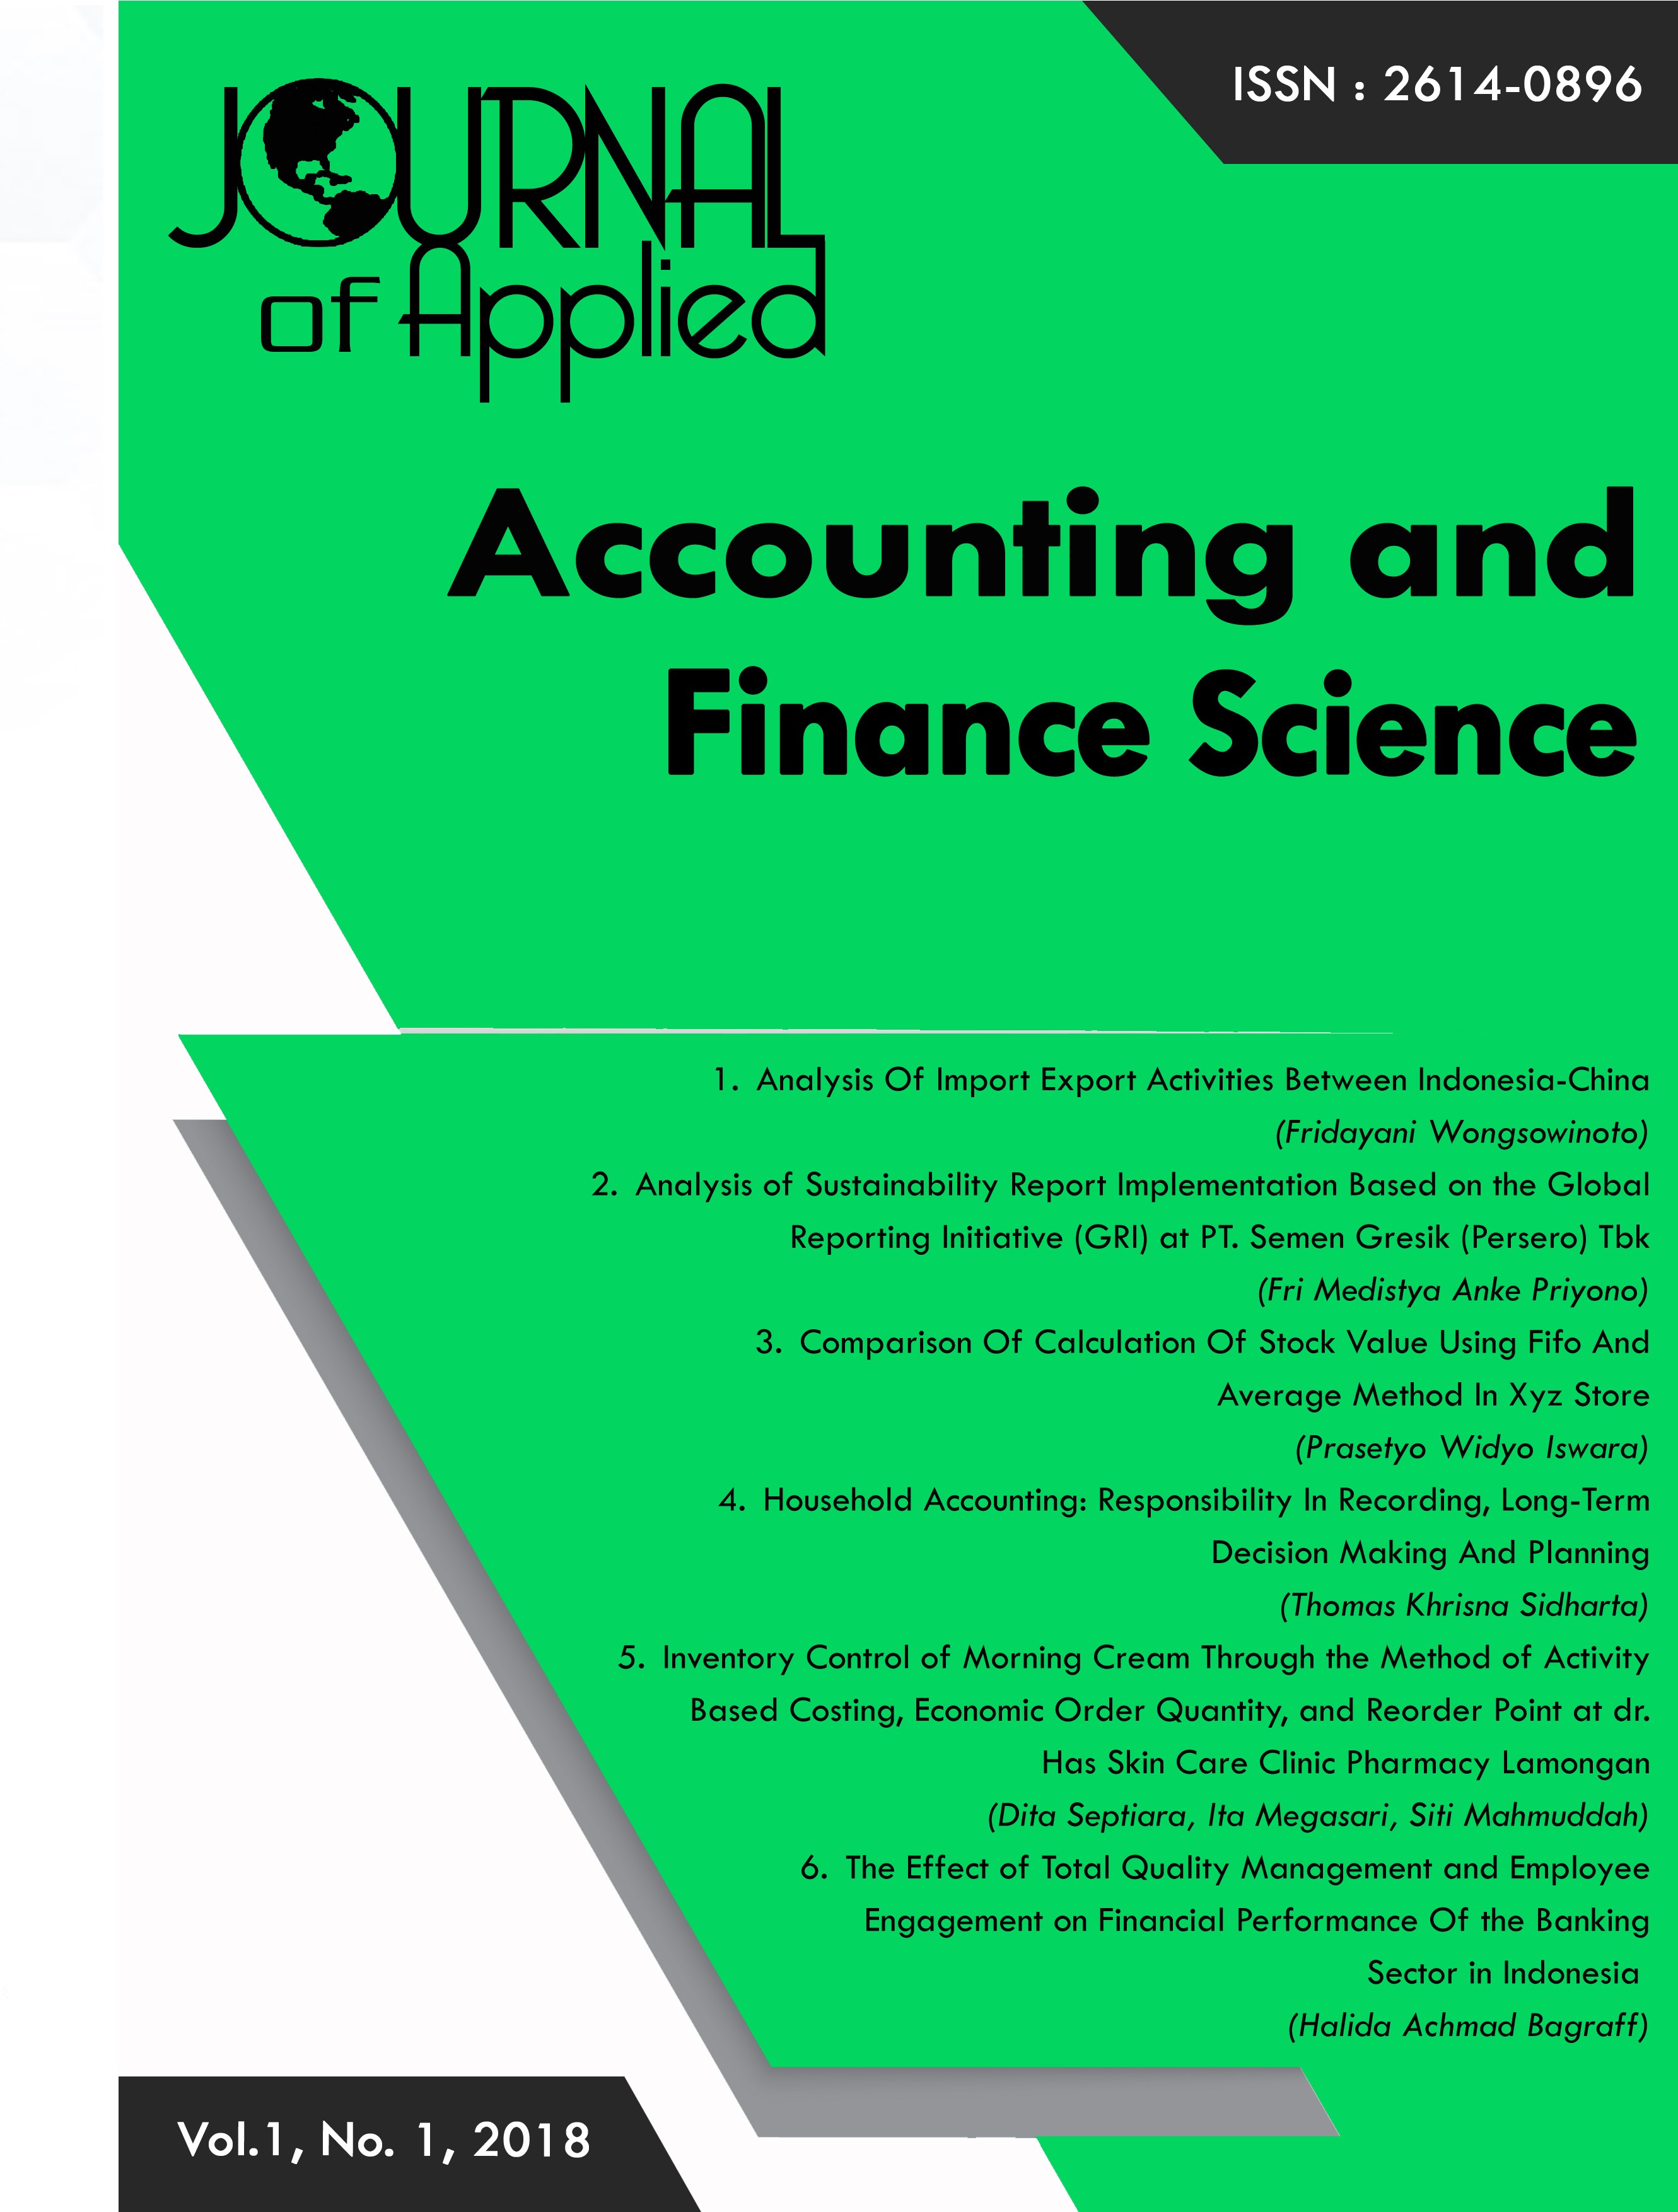 					View Vol. 1 No. 1  September (2019): Journal of Apllied Accounting and Finance Science
				